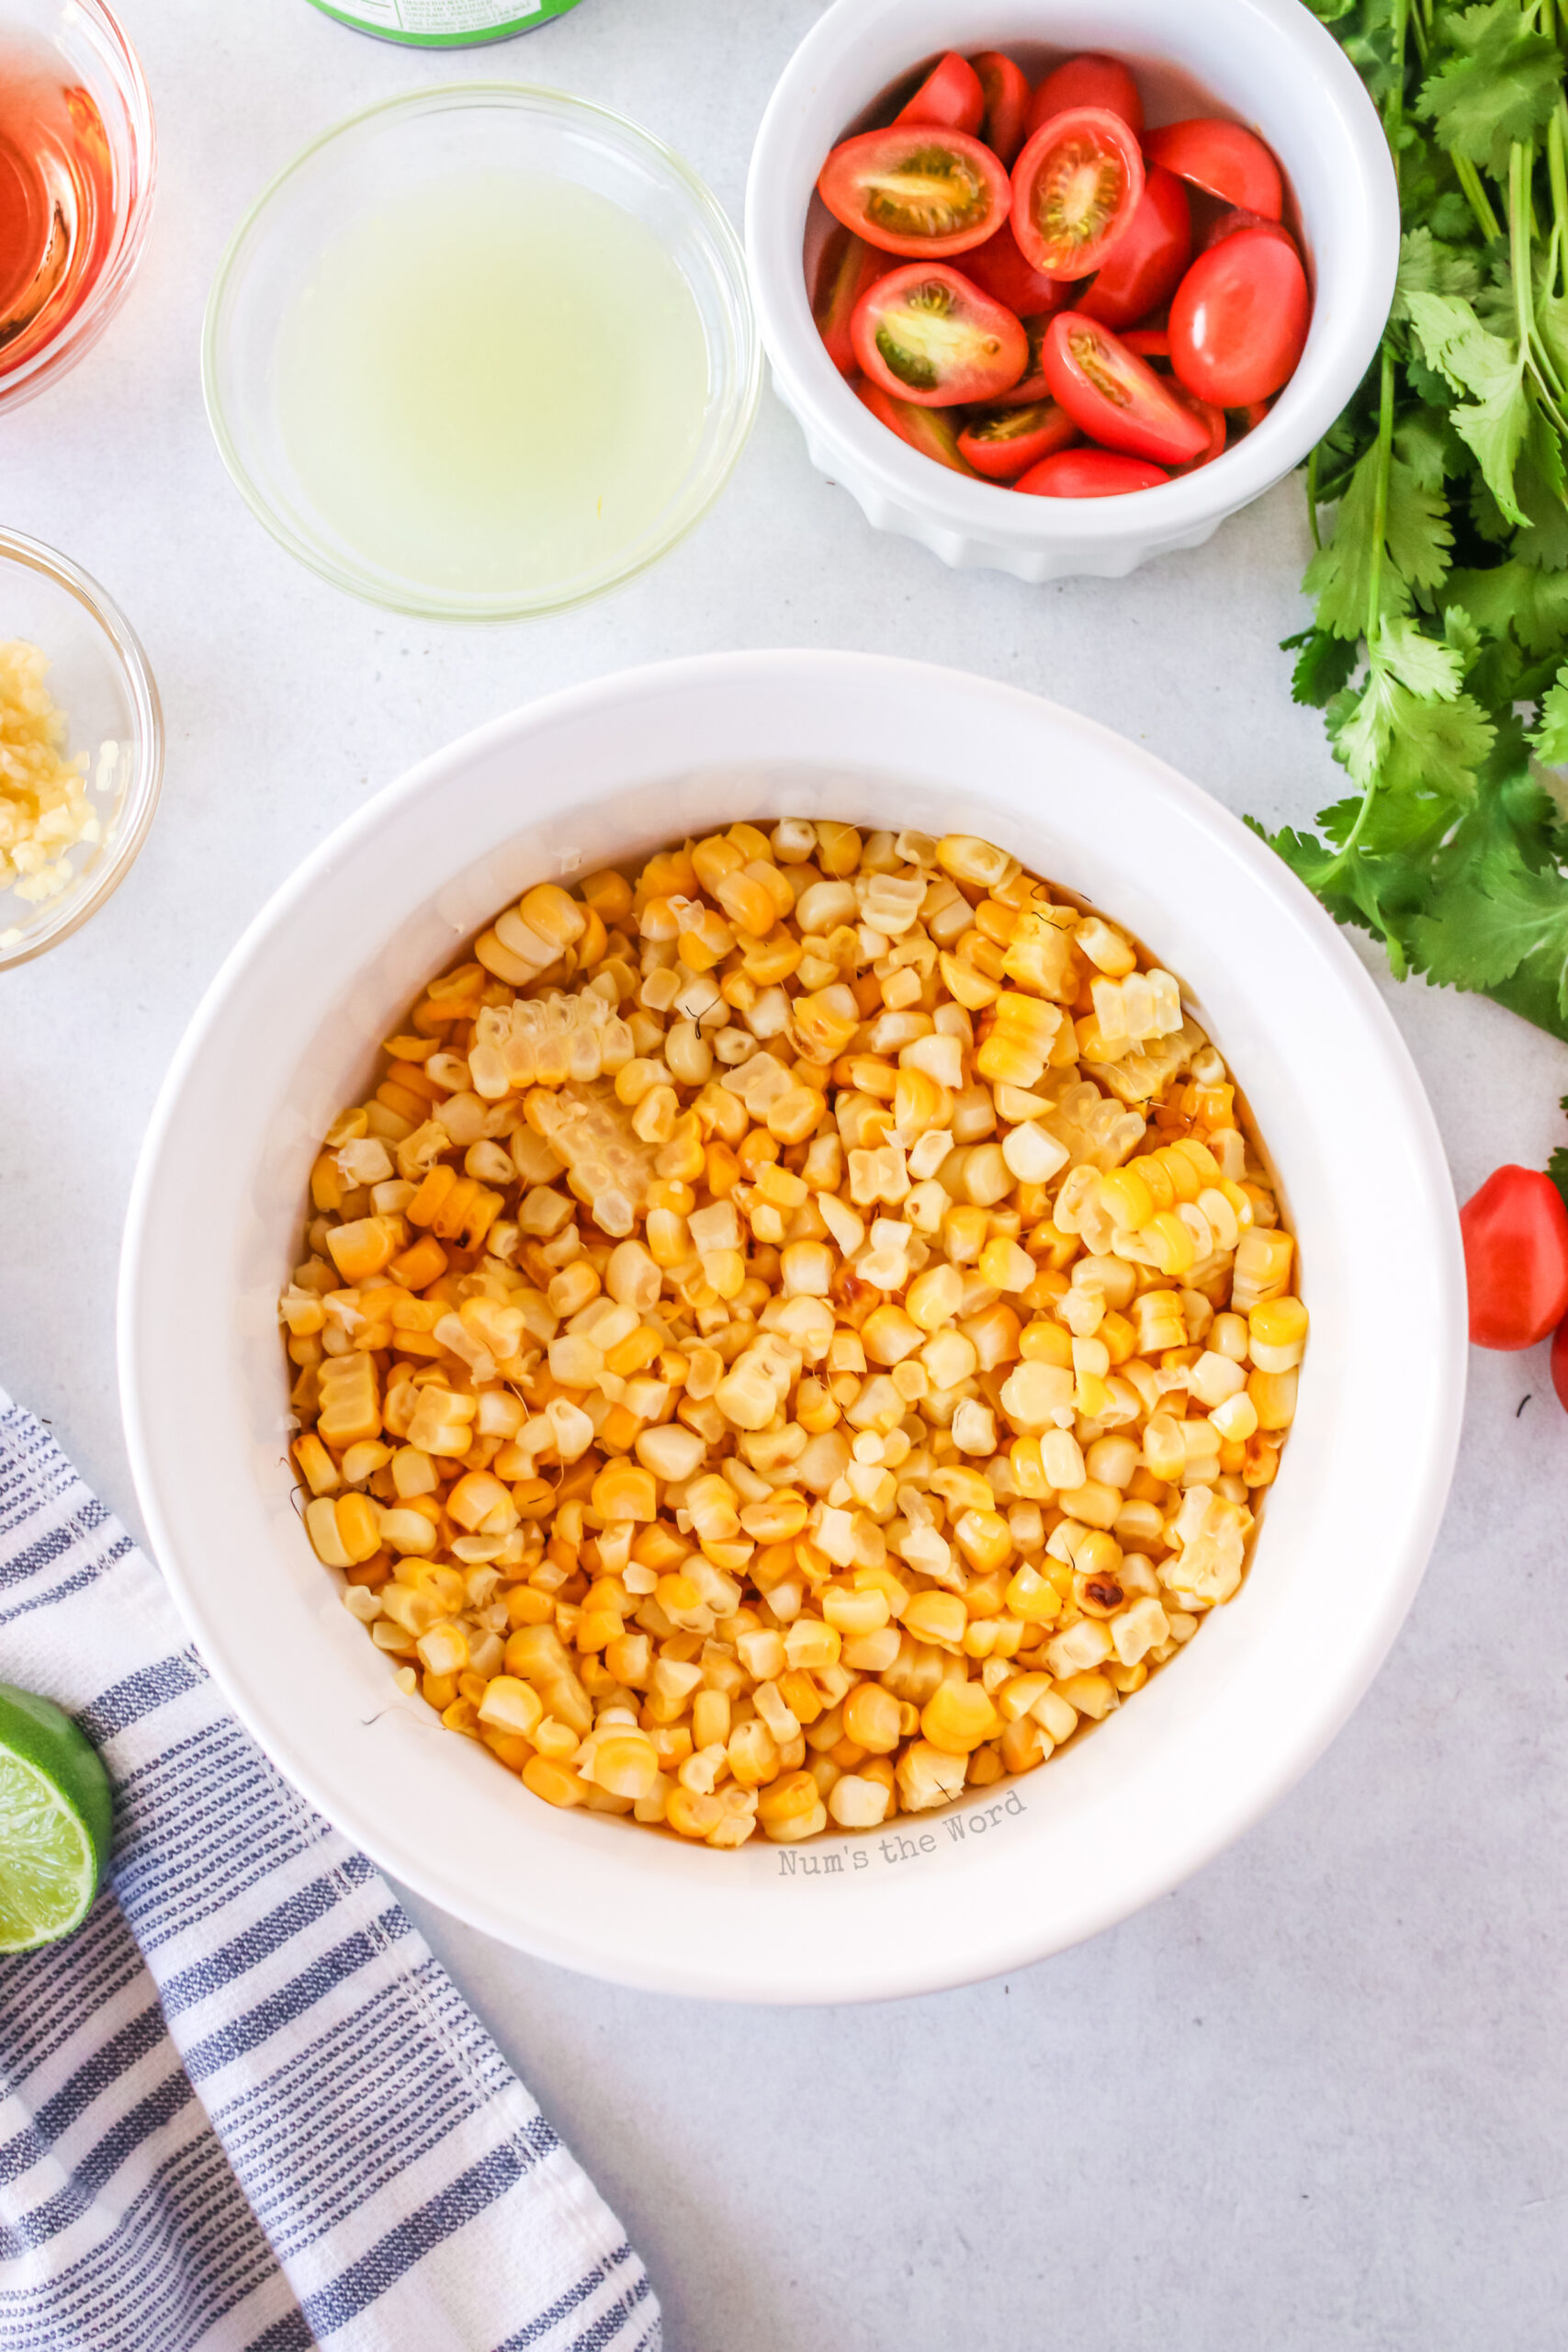 corn kernals are stripped off corn cobs and into a bowl.